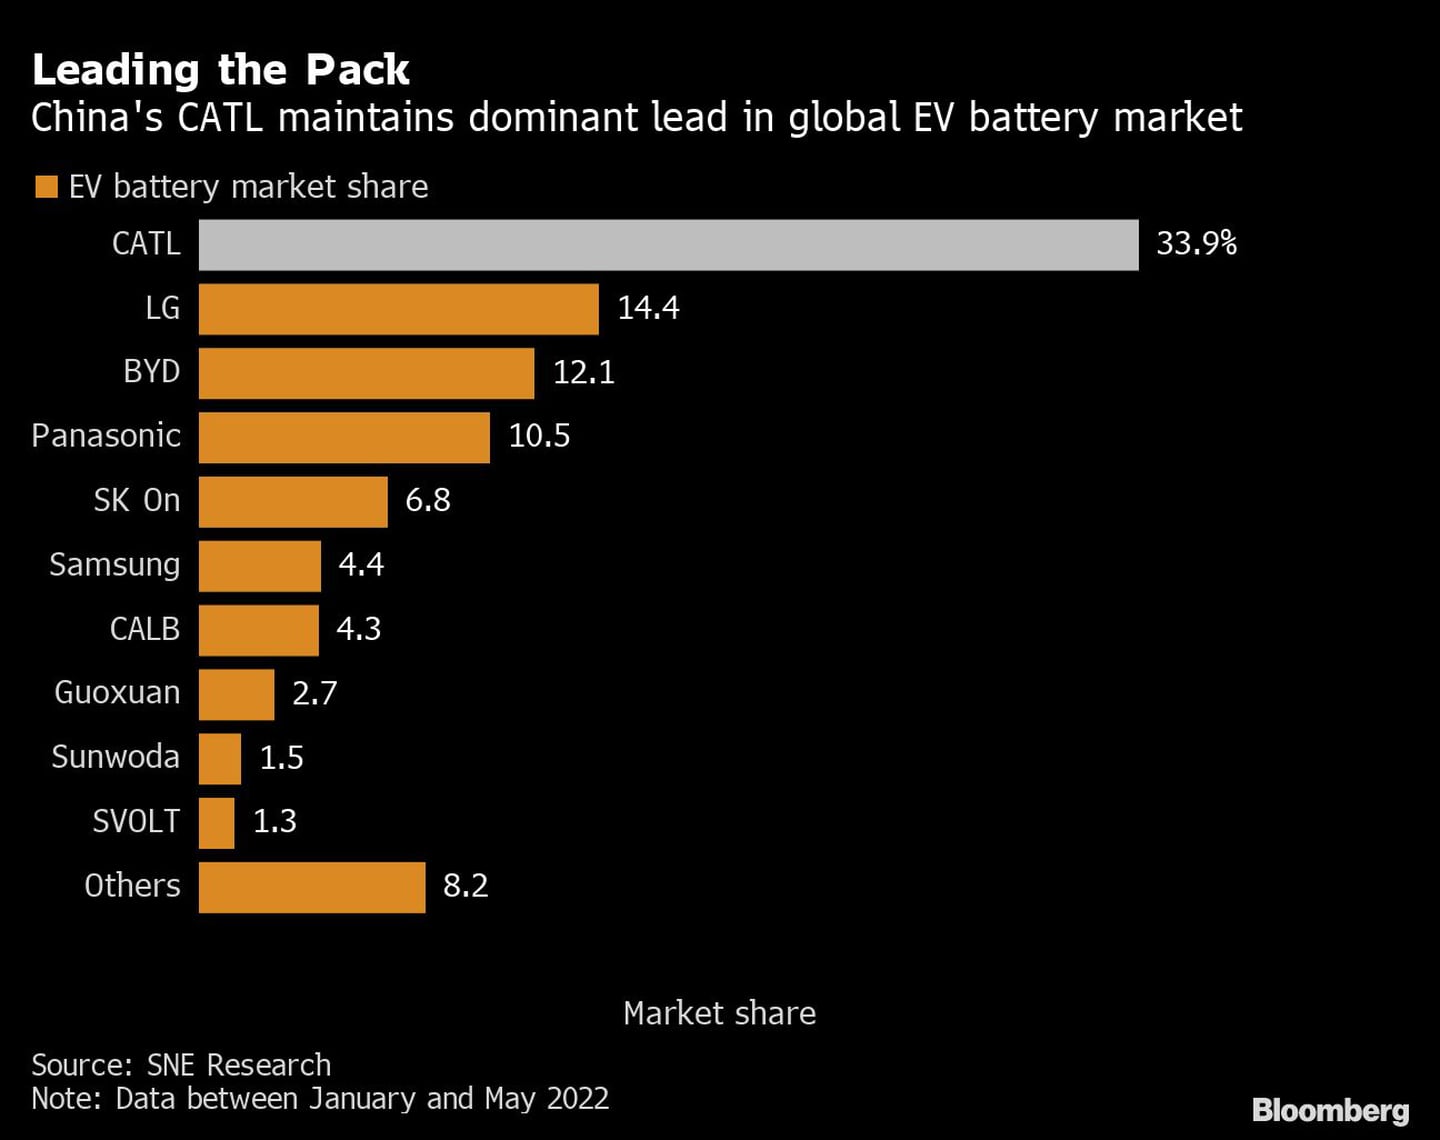 Leading the Pack | China's CATL maintains dominant lead in global EV battery marketdfd